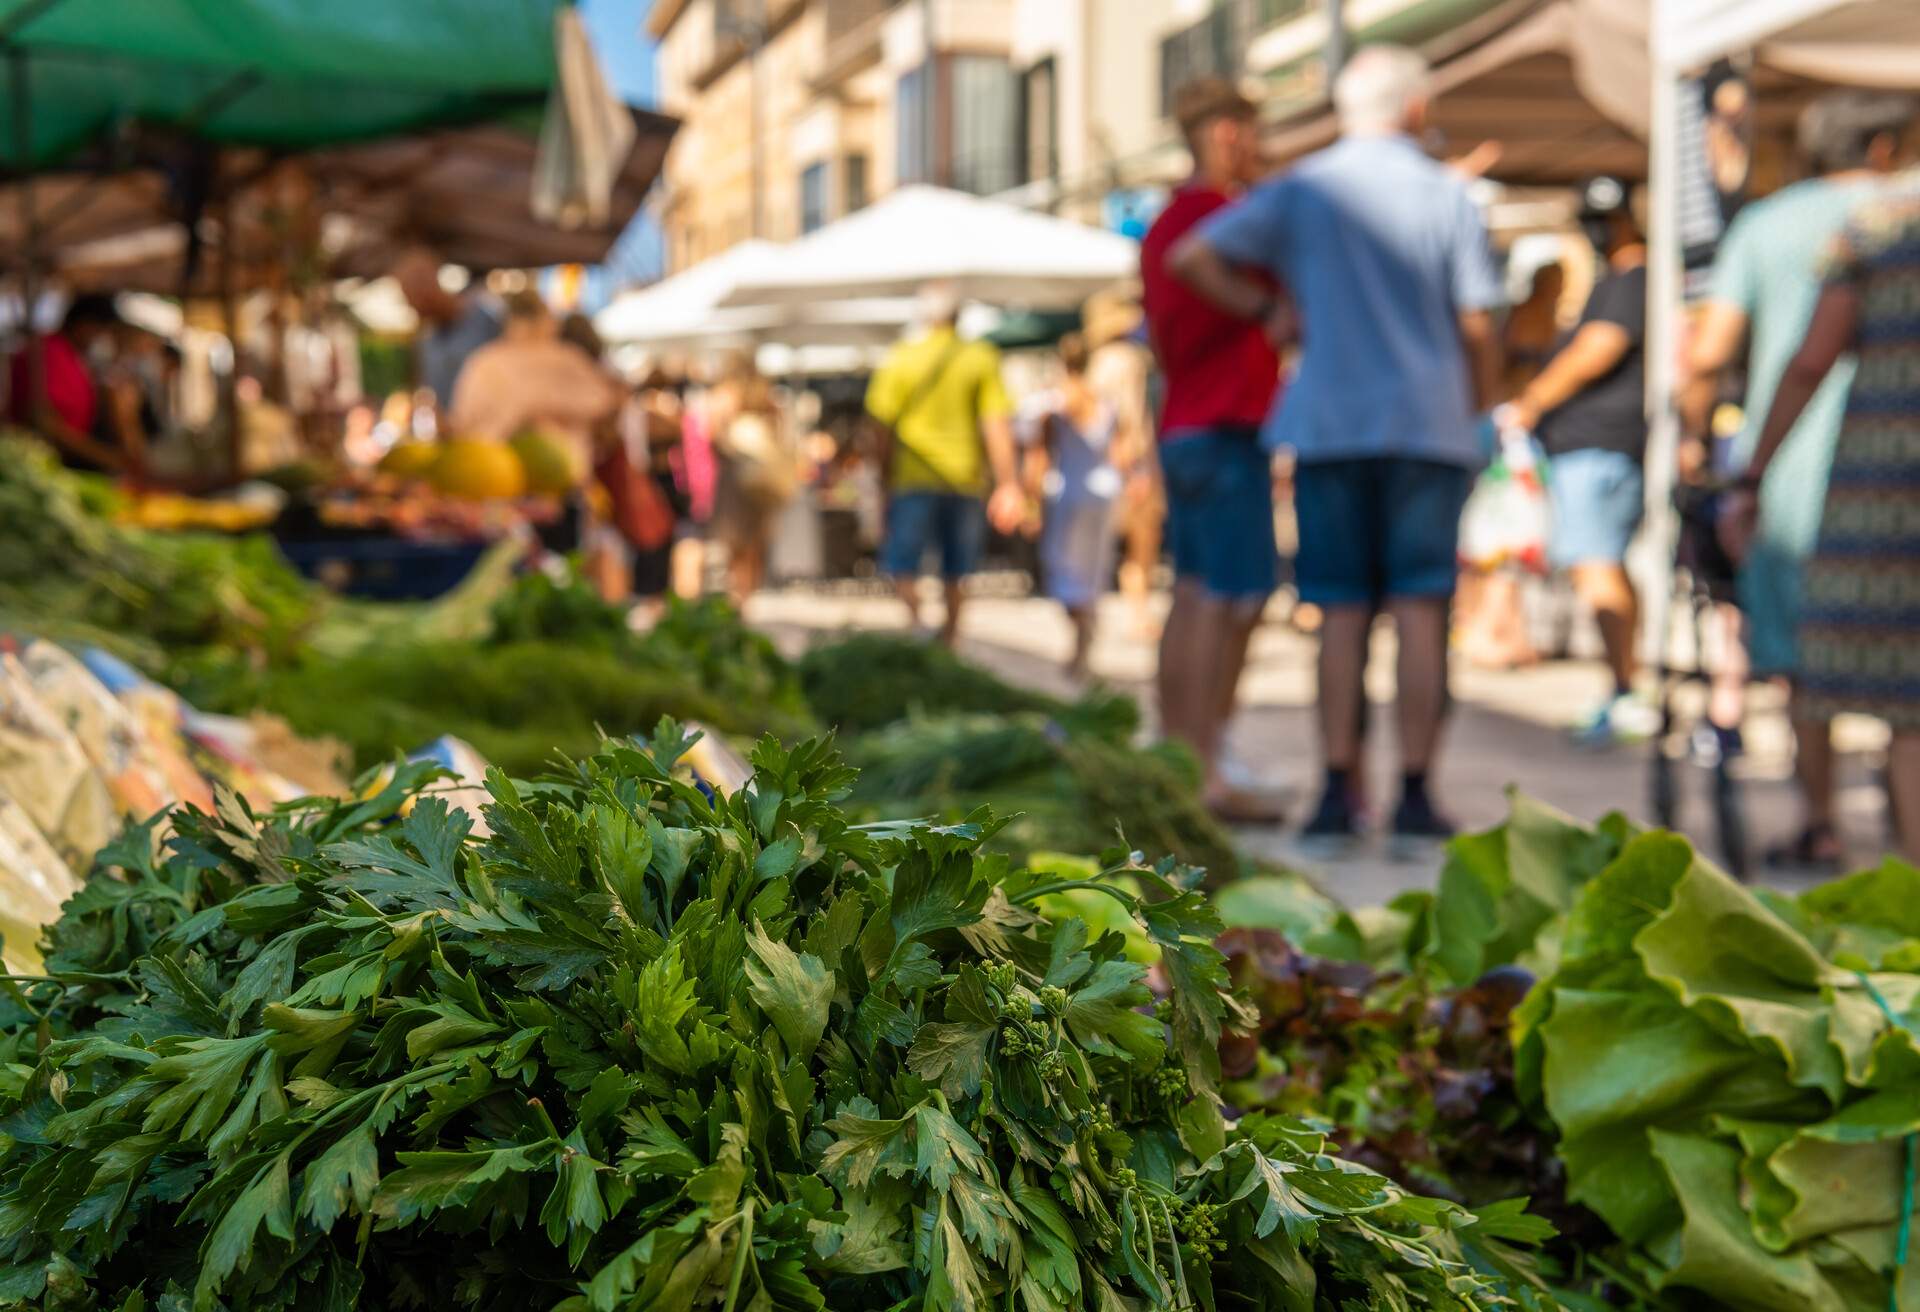 Close-up of bunches of green celery in a street market on the island of Mallorca. In the background, unrecognizable people shopping at the market